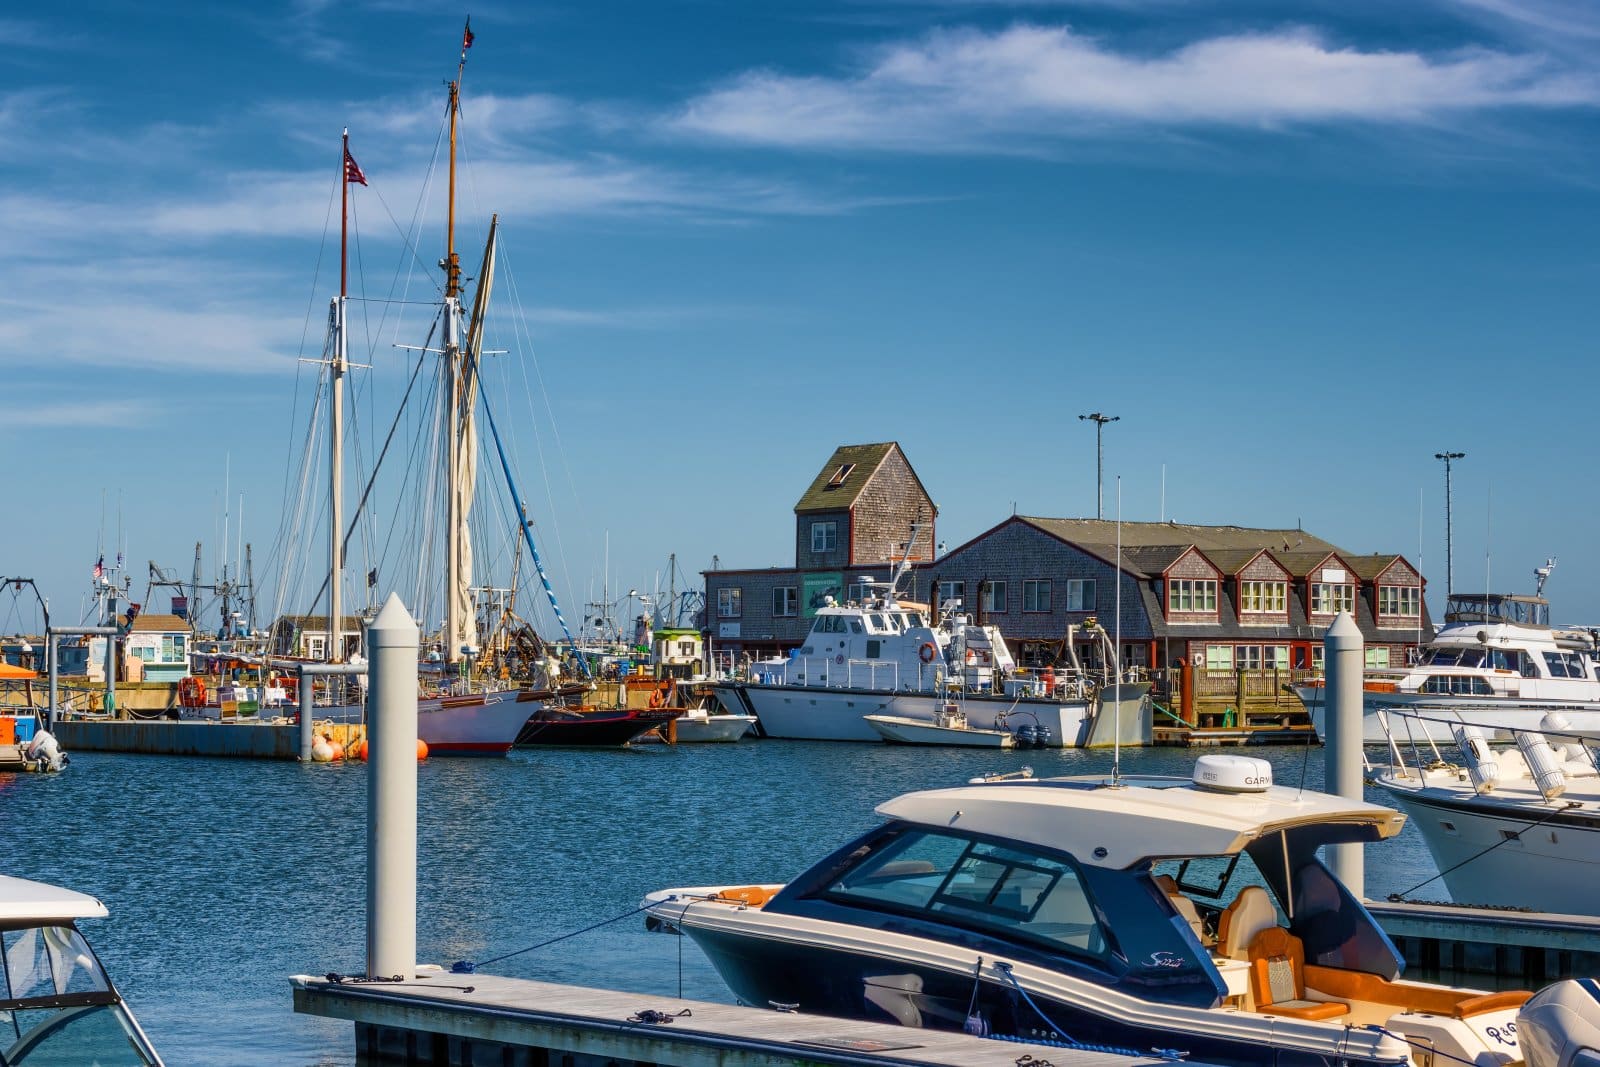 Image Credit: Shutterstock / Dee Browning <p><span>Provincetown, located at the tip of Cape Cod, is a small coastal resort town with a big reputation as an LGBTQ+ haven. Known affectionately as “P-Town,” this destination is celebrated for its beautiful beaches, art scene, and welcoming atmosphere. Provincetown has a rich history of LGBTQ+ culture and is famous for its lively Commercial Street, where galleries, shops, and restaurants buzz with activity. The town hosts numerous events throughout the year, including the renowned Provincetown Pride, Carnival, and Women’s Week, drawing visitors from all corners for celebrations and community gatherings.</span></p> <p><b>Insider’s Tip: </b><span>Don’t miss the opportunity to experience a whale-watching tour from Provincetown Harbor, where the waters are rich with marine life, offering a unique blend of natural beauty alongside the cultural festivities.</span></p> <p><b>When to Travel: </b><span>Summer months, from June to August, are peak season, offering warm weather and a full calendar of events and festivals celebrating the LGBTQ+ community.</span></p> <p><b>How to Get There: </b><span>Provincetown is accessible by car, ferry from Boston, or a small regional flight into Provincetown Municipal Airport. The ferry offers a scenic and convenient option during the summer months.</span></p>